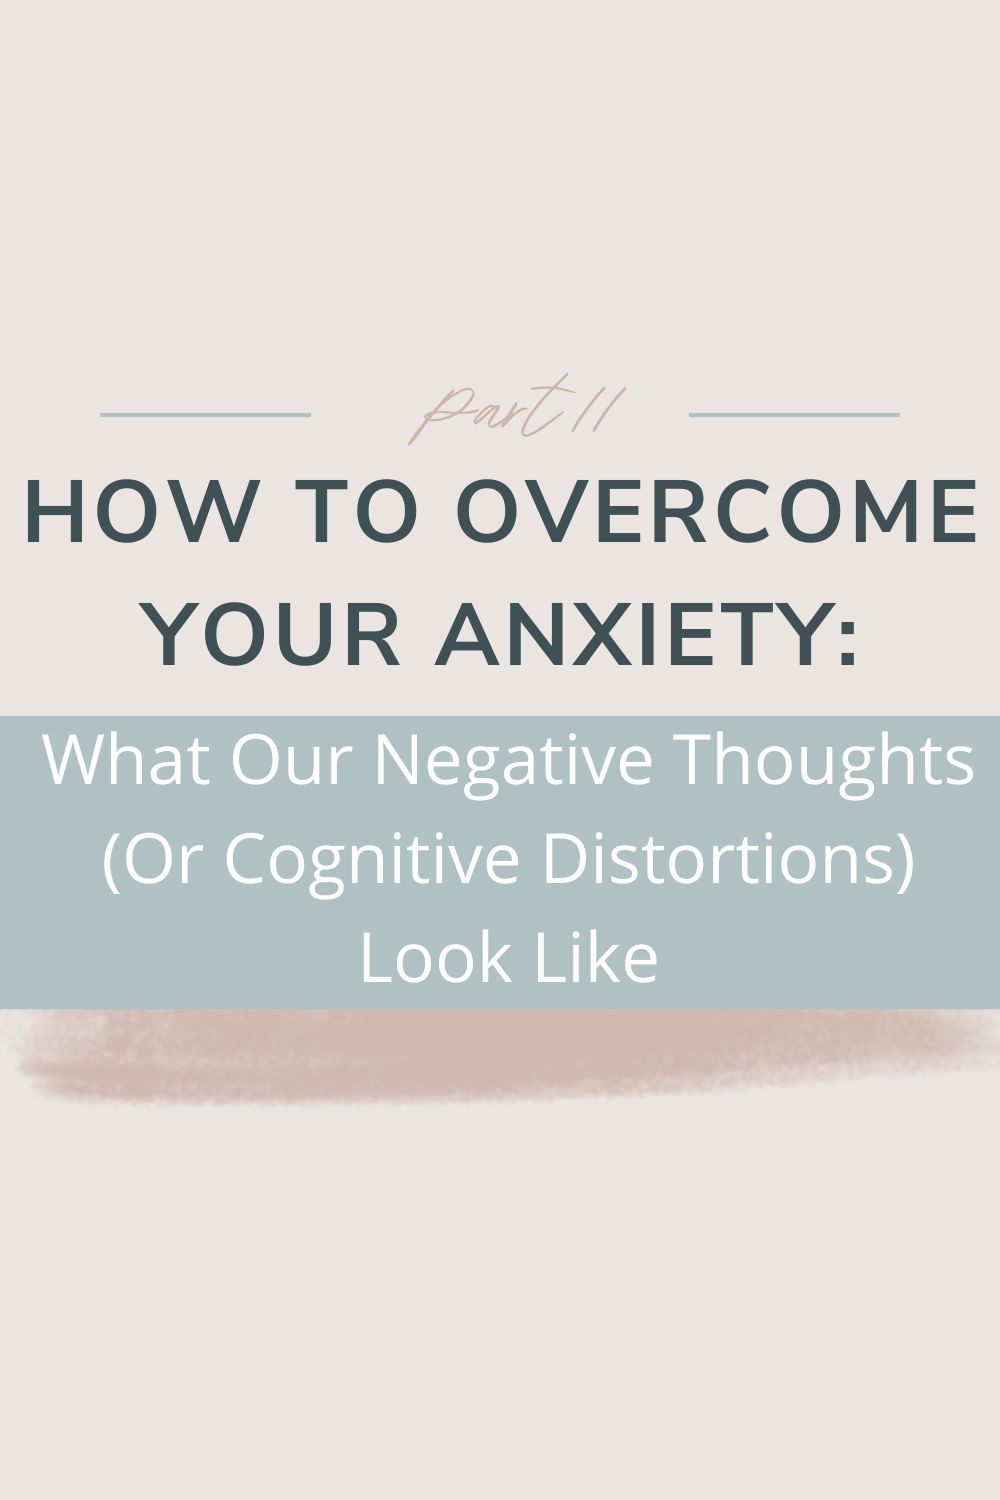 How to Overcome Your Anxiety: What Our Negative Thoughts (Or Cognitive Distortions) Look Like | In this post we take our understanding of anxiety one layer deeper by diving into the super-therapy-word "cognitive distortions." We'll unpack what it means and consider what types of distortions there are. Cheers!